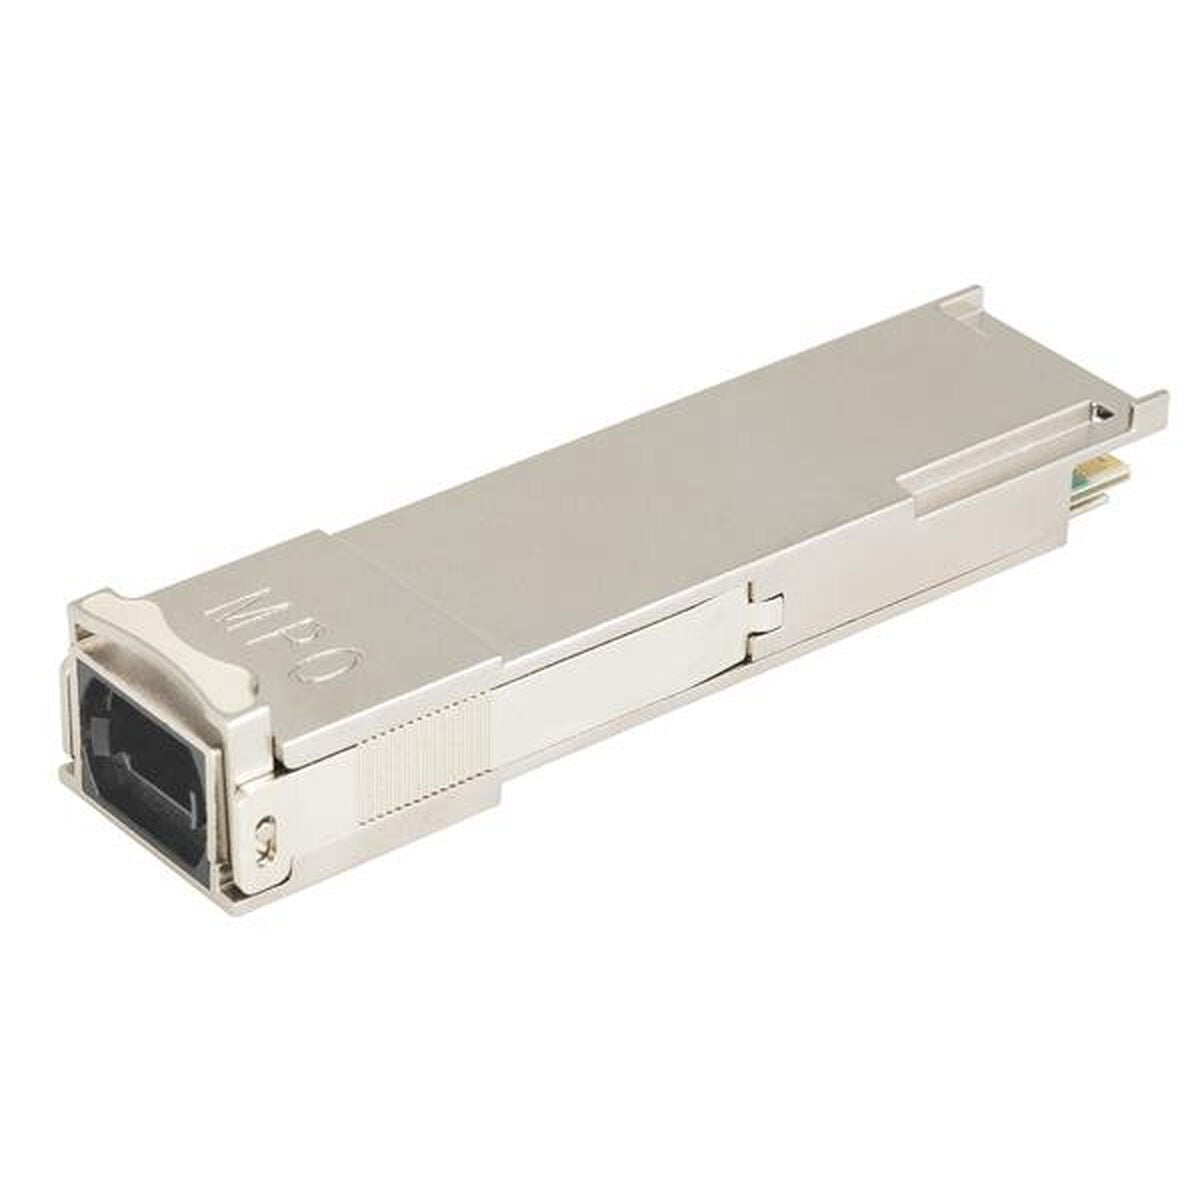 MultiMode SFP+ Fibre Module Startech QSFP-40G-SR4-S-ST, Startech, Computing, Network devices, multimode-sfp-fibre-module-startech-qsfp-40g-sr4-s-st, Brand_Startech, category-reference-2609, category-reference-2803, category-reference-2821, category-reference-t-19685, category-reference-t-19914, Condition_NEW, networks/wiring, Price_200 - 300, Teleworking, RiotNook